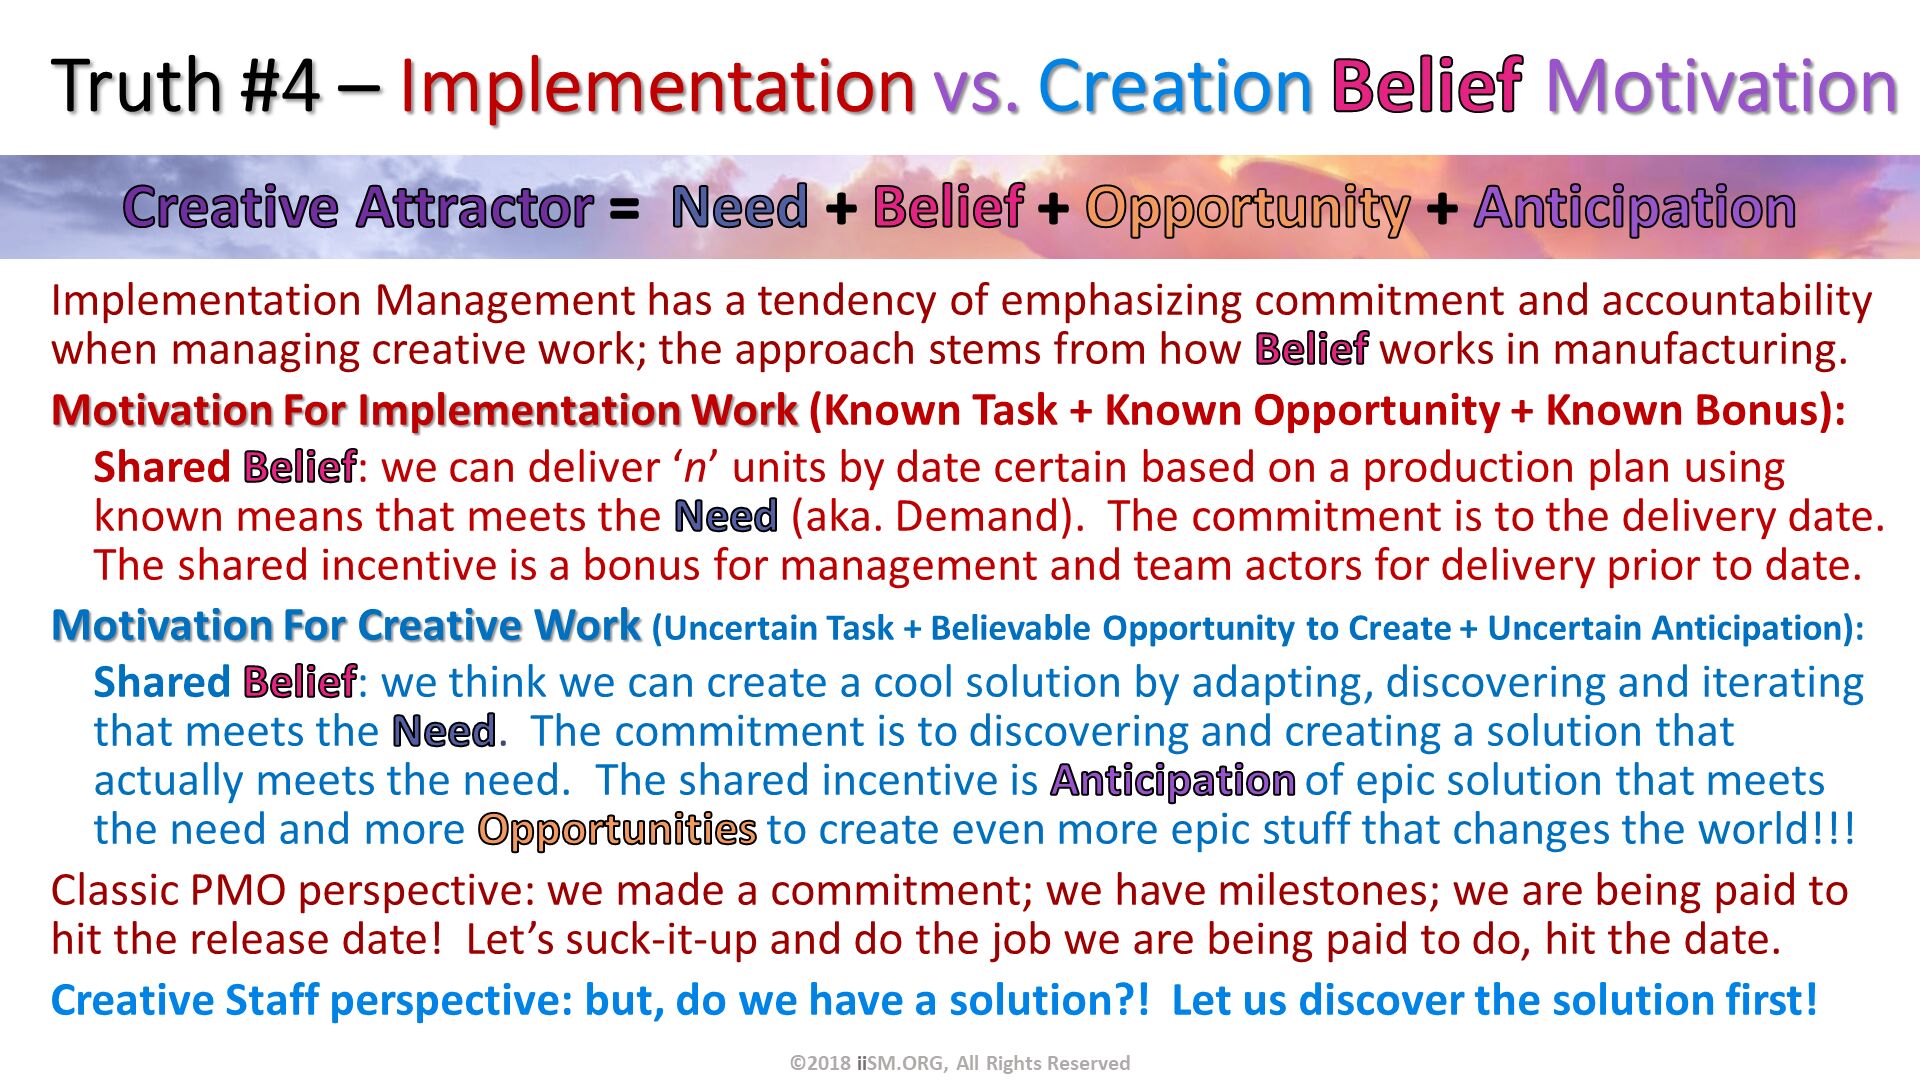 Truth #4 – Implementation vs. Creation Belief Motivation. Implementation Management has a tendency of emphasizing commitment and accountability when managing creative work; the approach stems from how Belief works in manufacturing.
Motivation For Implementation Work (Known Task + Known Opportunity + Known Bonus):
Shared Belief: we can deliver ‘n’ units by date certain based on a production plan using known means that meets the Need (aka. Demand).  The commitment is to the delivery date.  The shared incentive is a bonus for management and team actors for delivery prior to date.
Motivation For Creative Work (Uncertain Task + Believable Opportunity to Create + Uncertain Anticipation):
Shared Belief: we think we can create a cool solution by adapting, discovering and iterating that meets the Need.  The commitment is to discovering and creating a solution that actually meets the need.  The shared incentive is Anticipation of epic solution that meets the need and more Opportunities to create even more epic stuff that changes the world!!! 
Classic PMO perspective: we made a commitment; we have milestones; we are being paid to hit the release date!  Let’s suck-it-up and do the job we are being paid to do, hit the date.  
Creative Staff perspective: but, do we have a solution?!  Let us discover the solution first!. ©2018 iiSM.ORG, All Rights Reserved. 